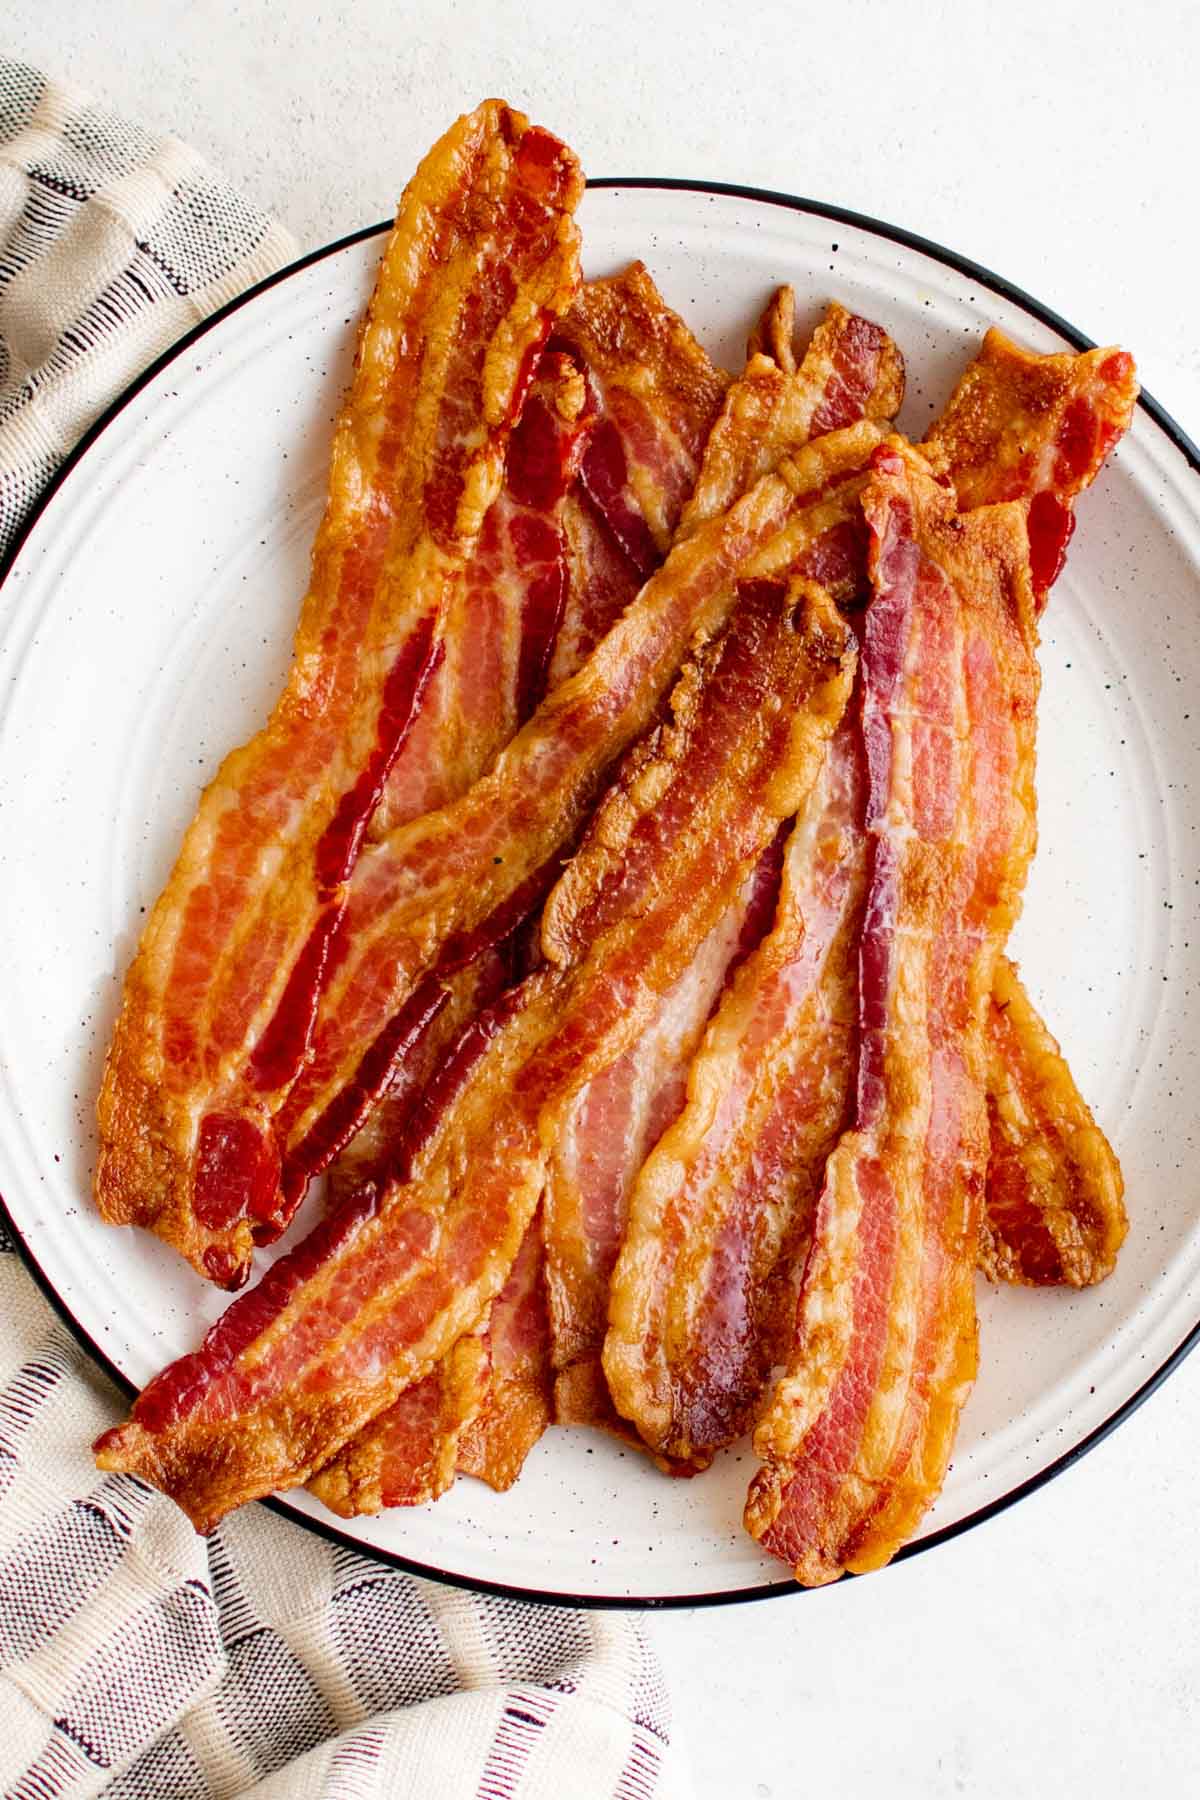 Slices of crispy bacon on a plate.